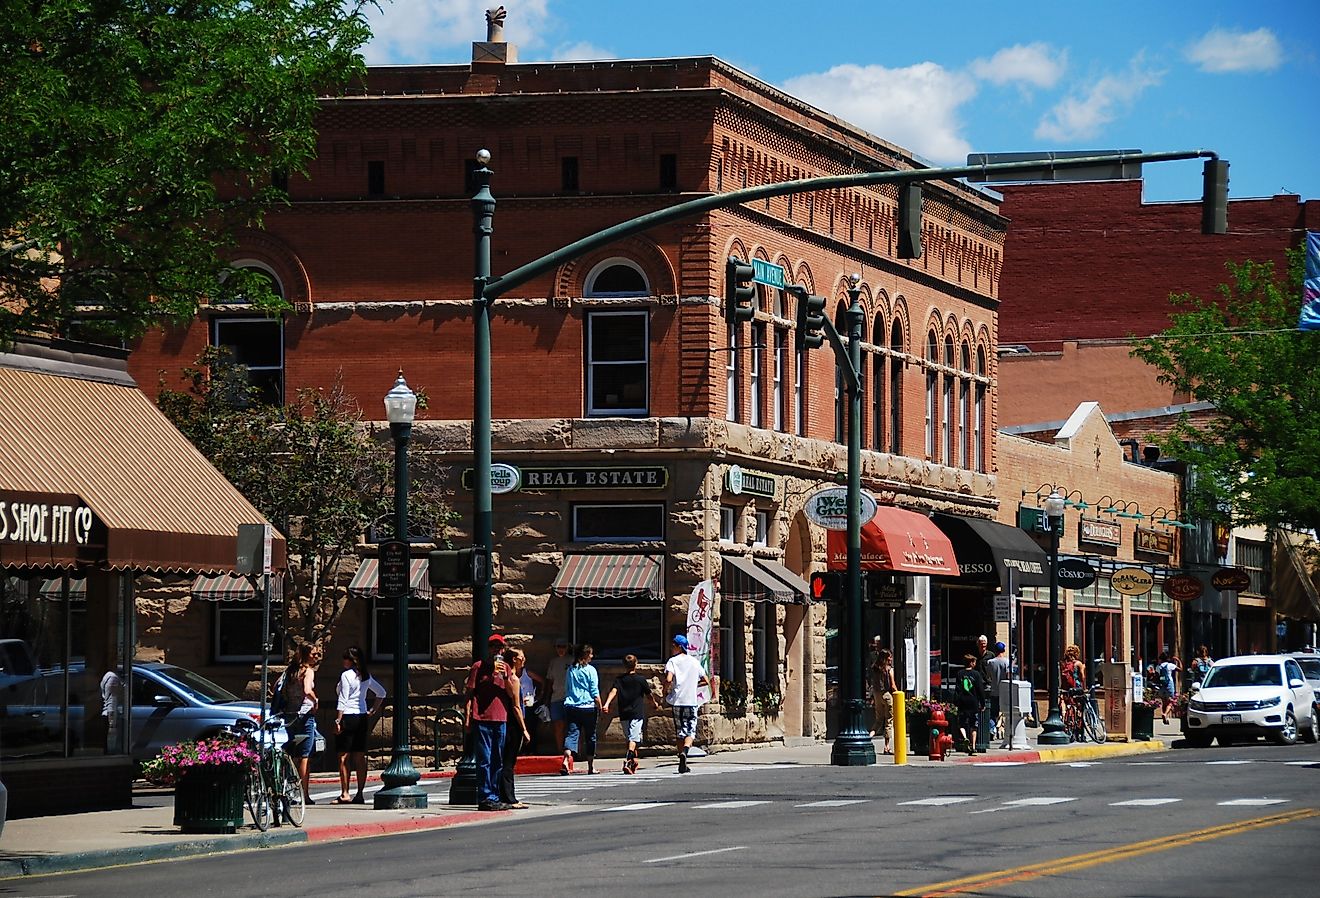 A view of Main Avenue in Durango, featuring the oldest bank building in Colorado. Image credit WorldPictures via Shutterstock.